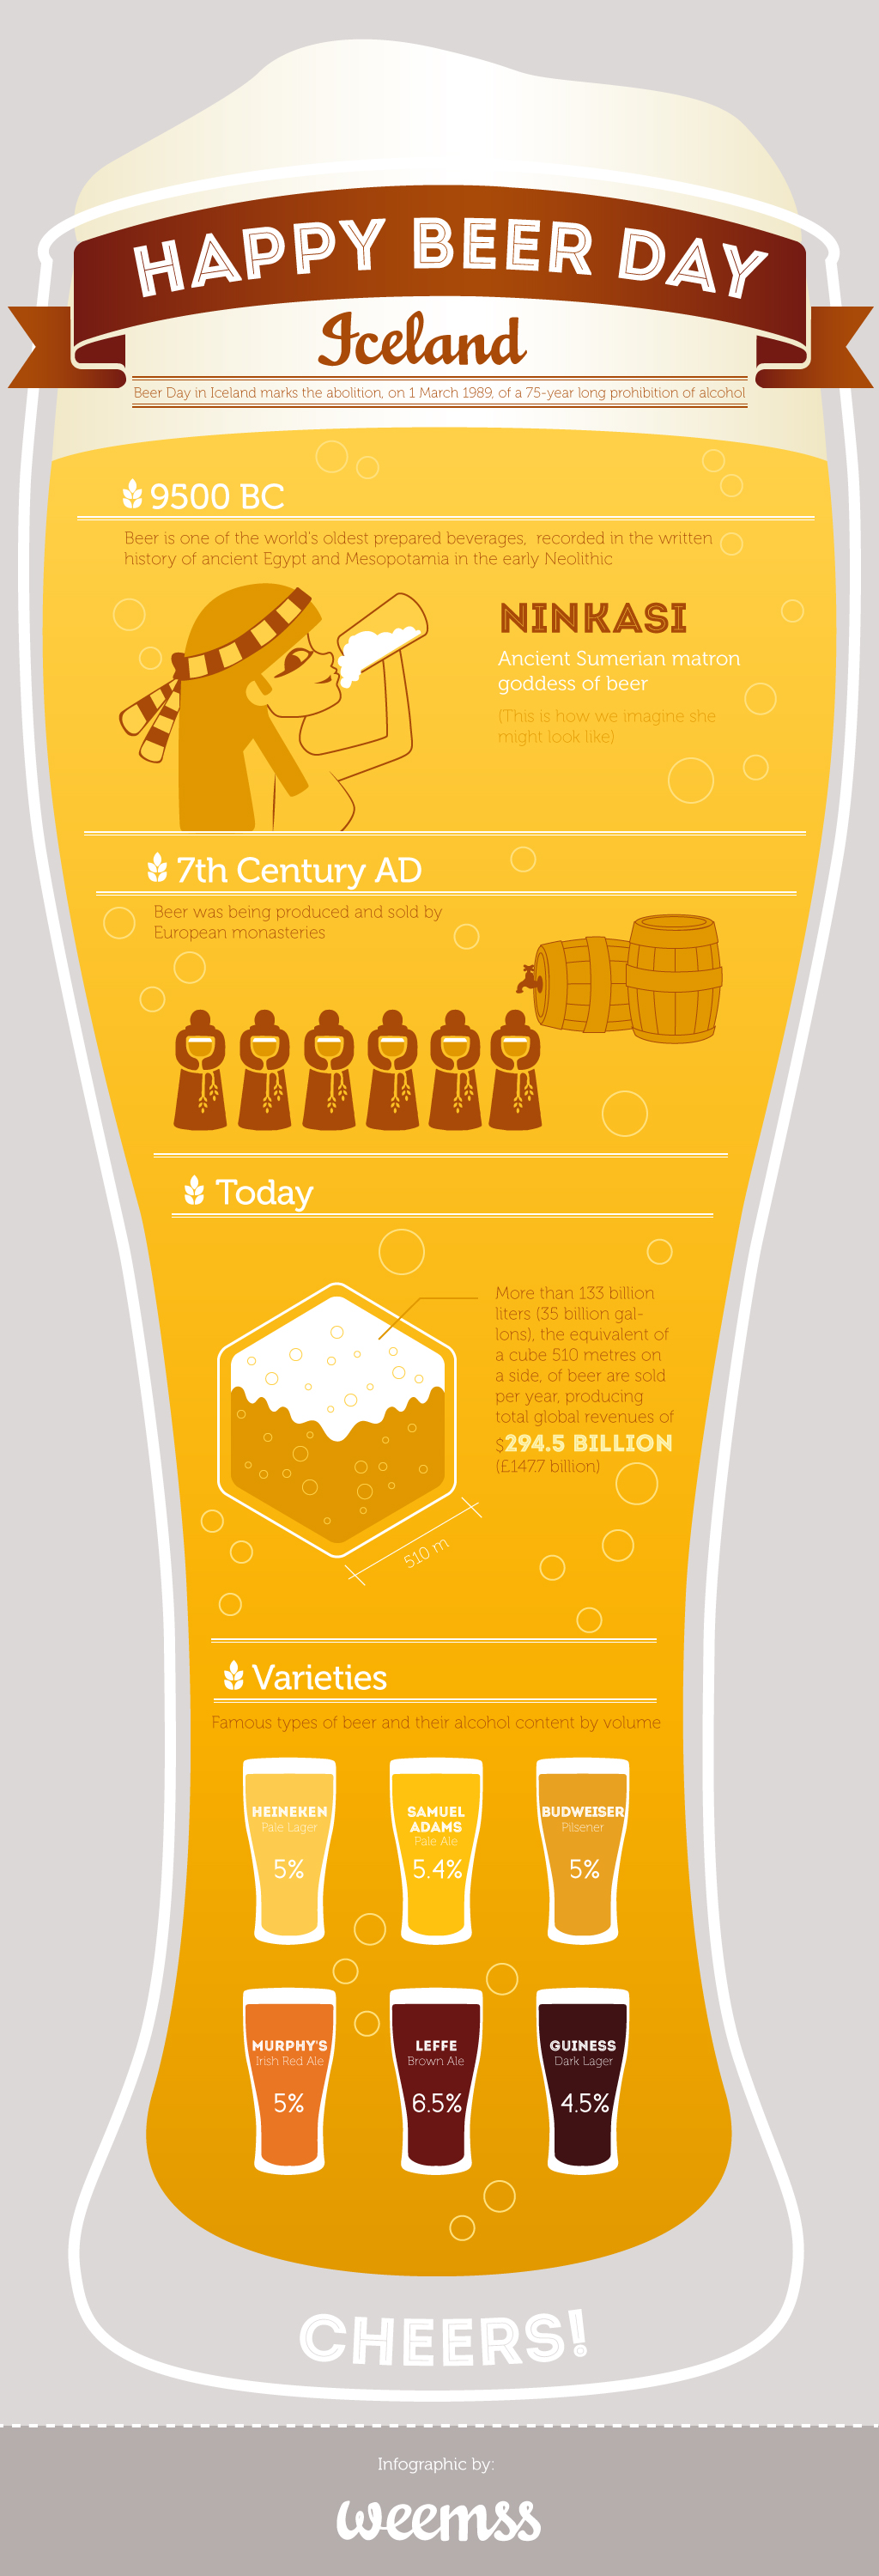 Iceland-beer-facts